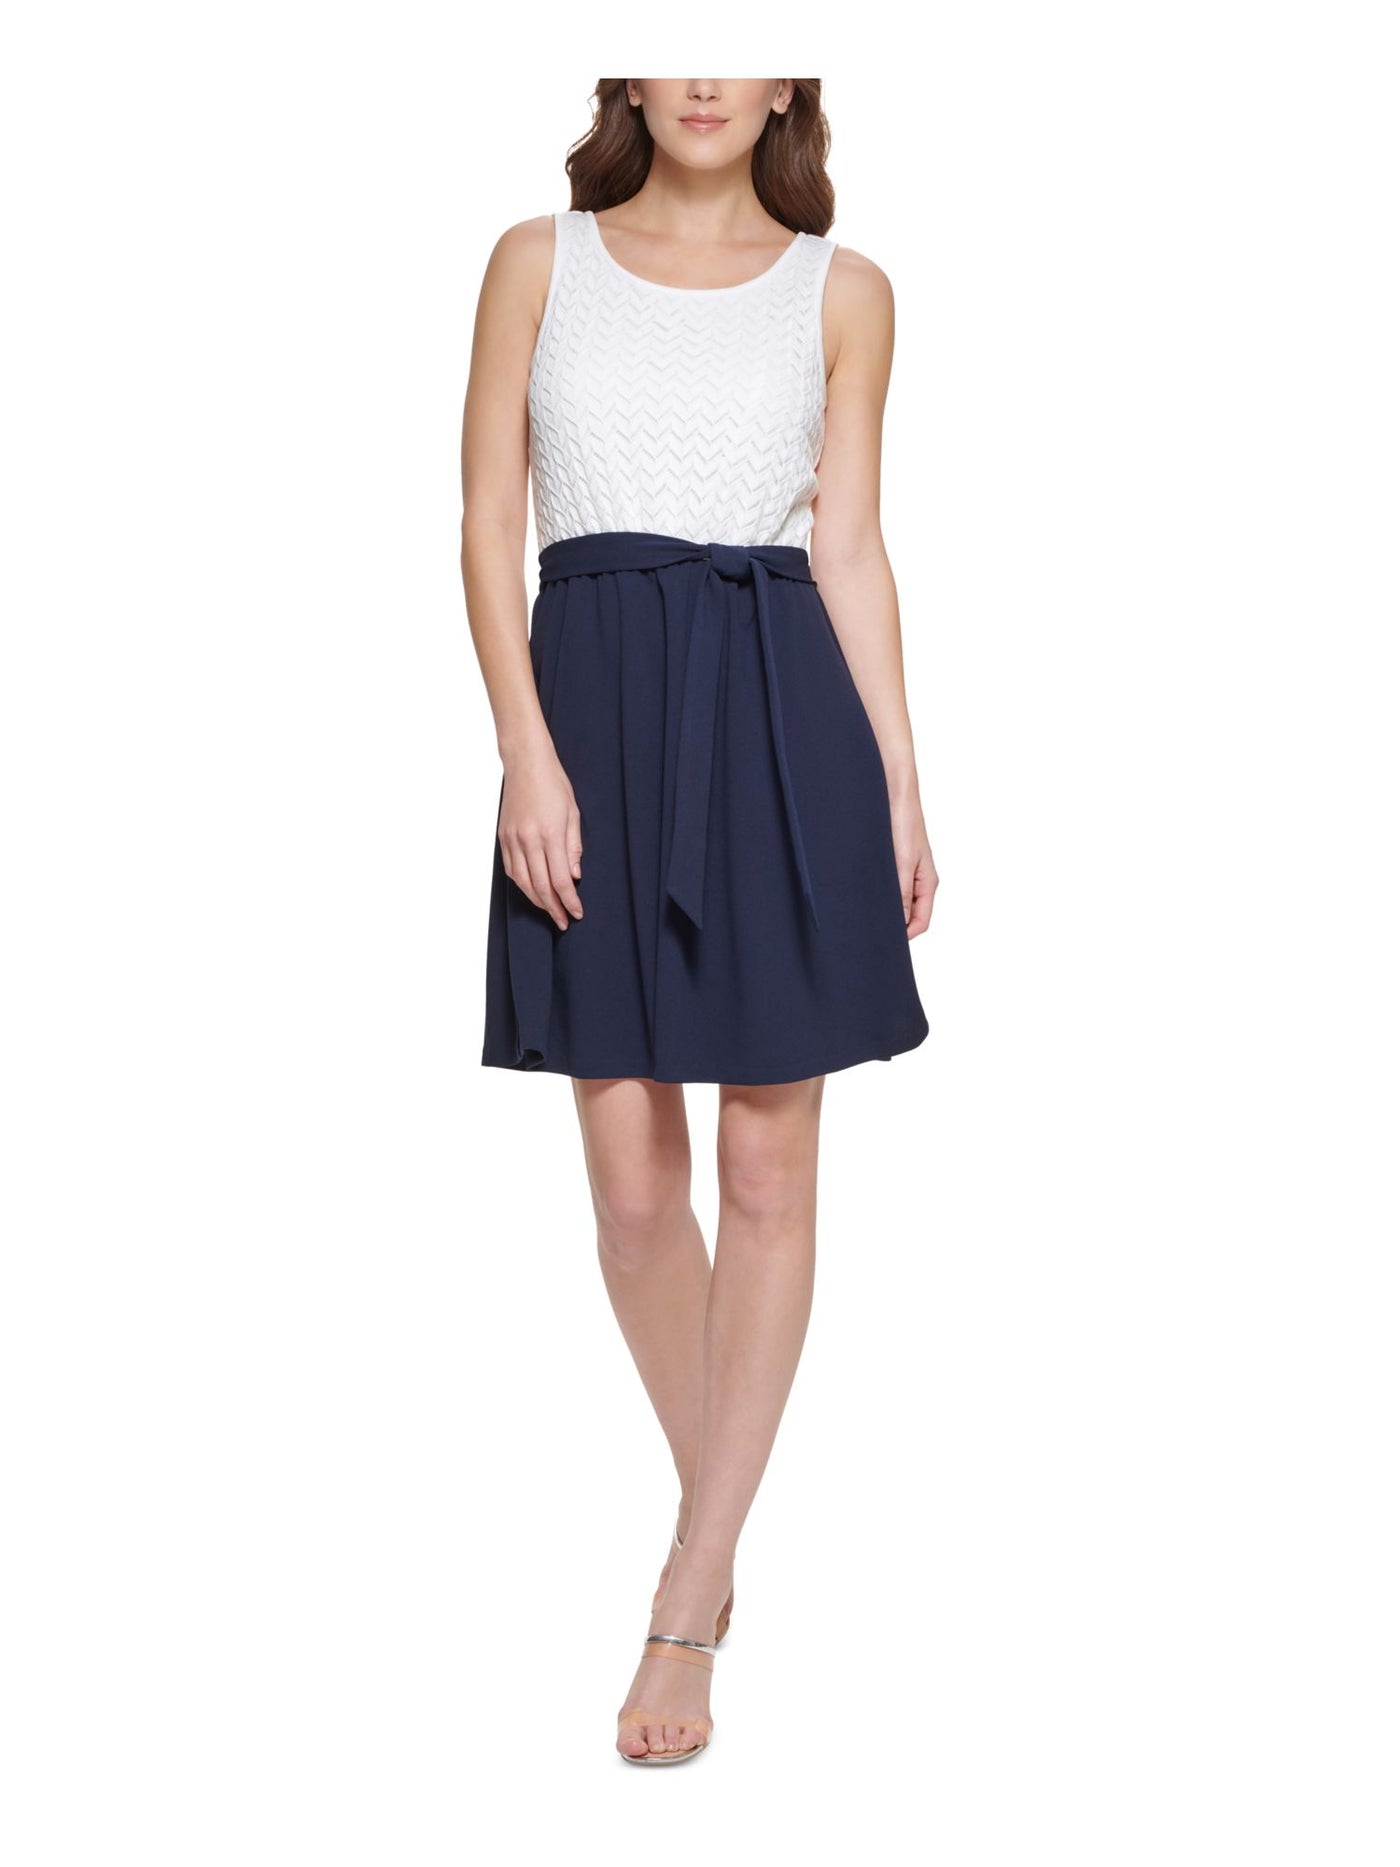 DKNY Womens White Zippered Tie Partially Lined Color Block Sleeveless Round Neck Above The Knee Fit + Flare Dress 12